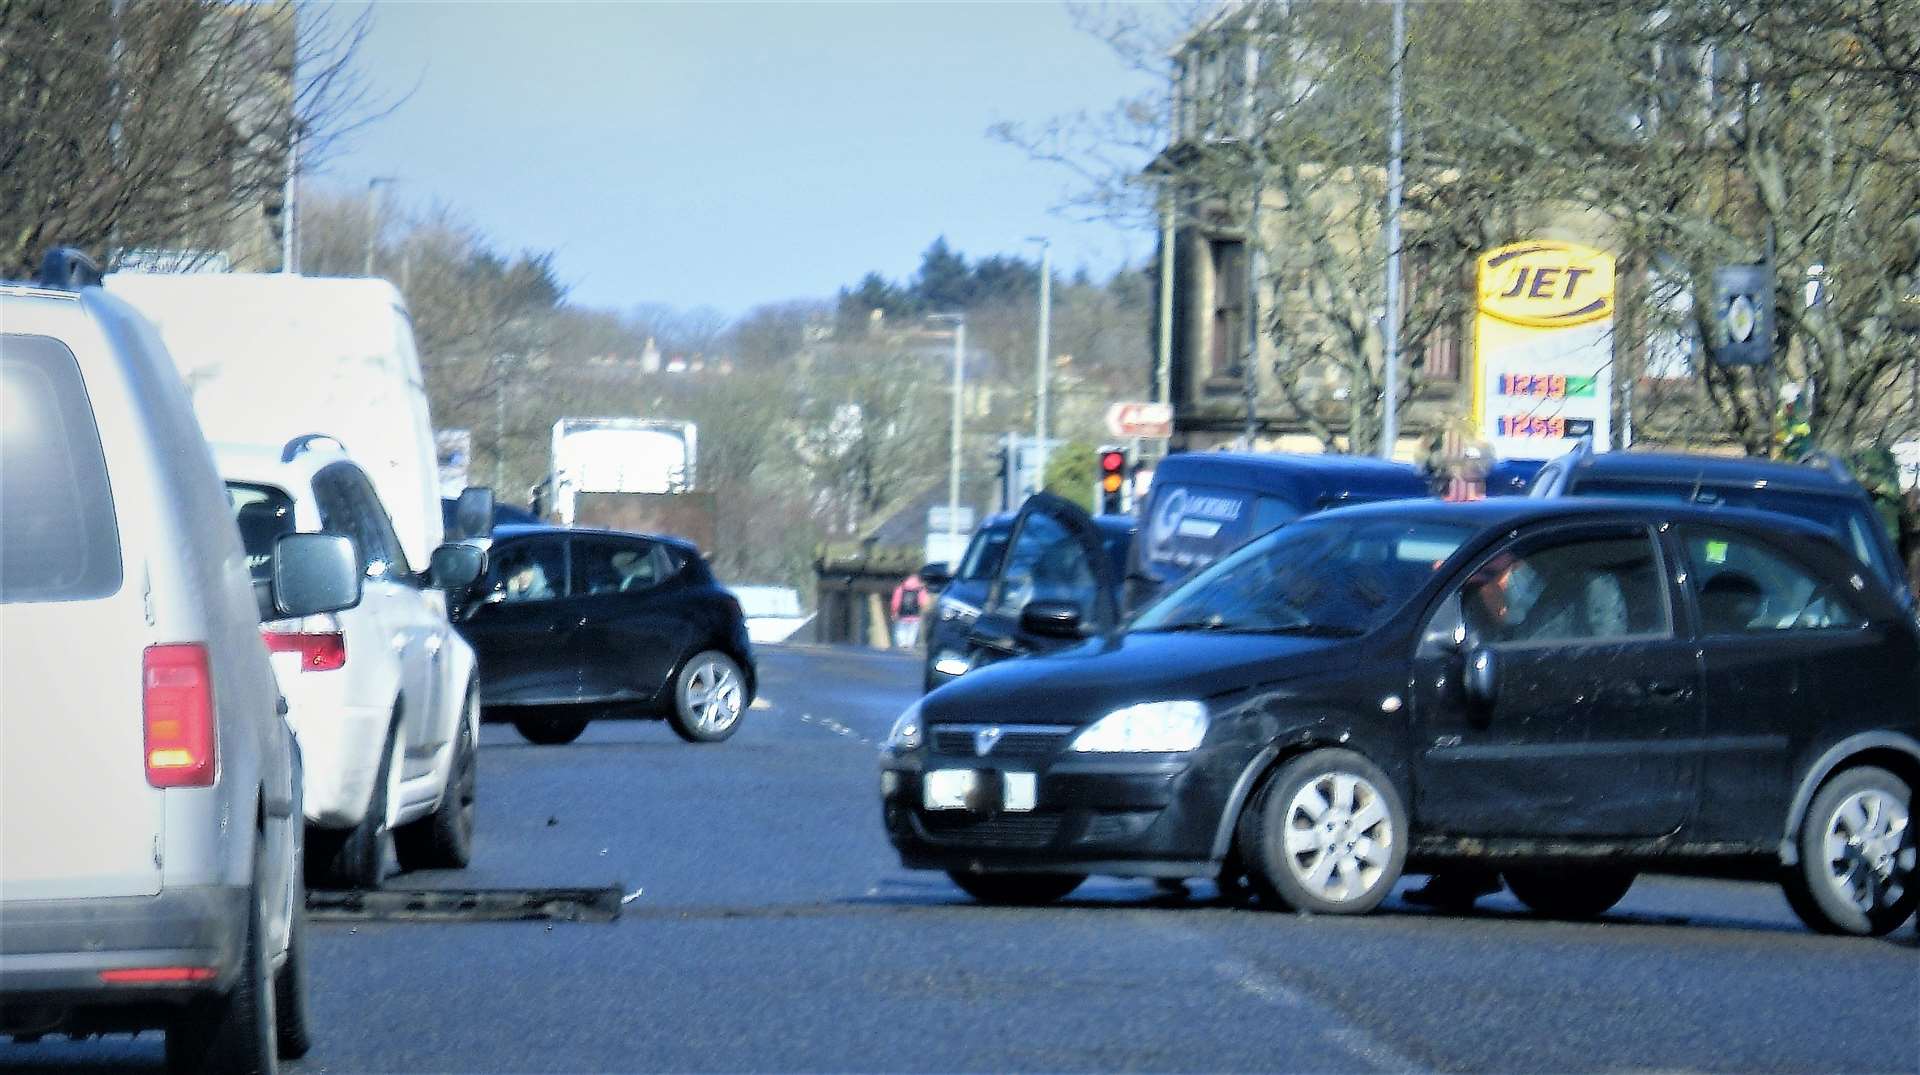 The incident involved a car colliding with two parked vehicles on Francis Street in Wick. Picture: A Morrison